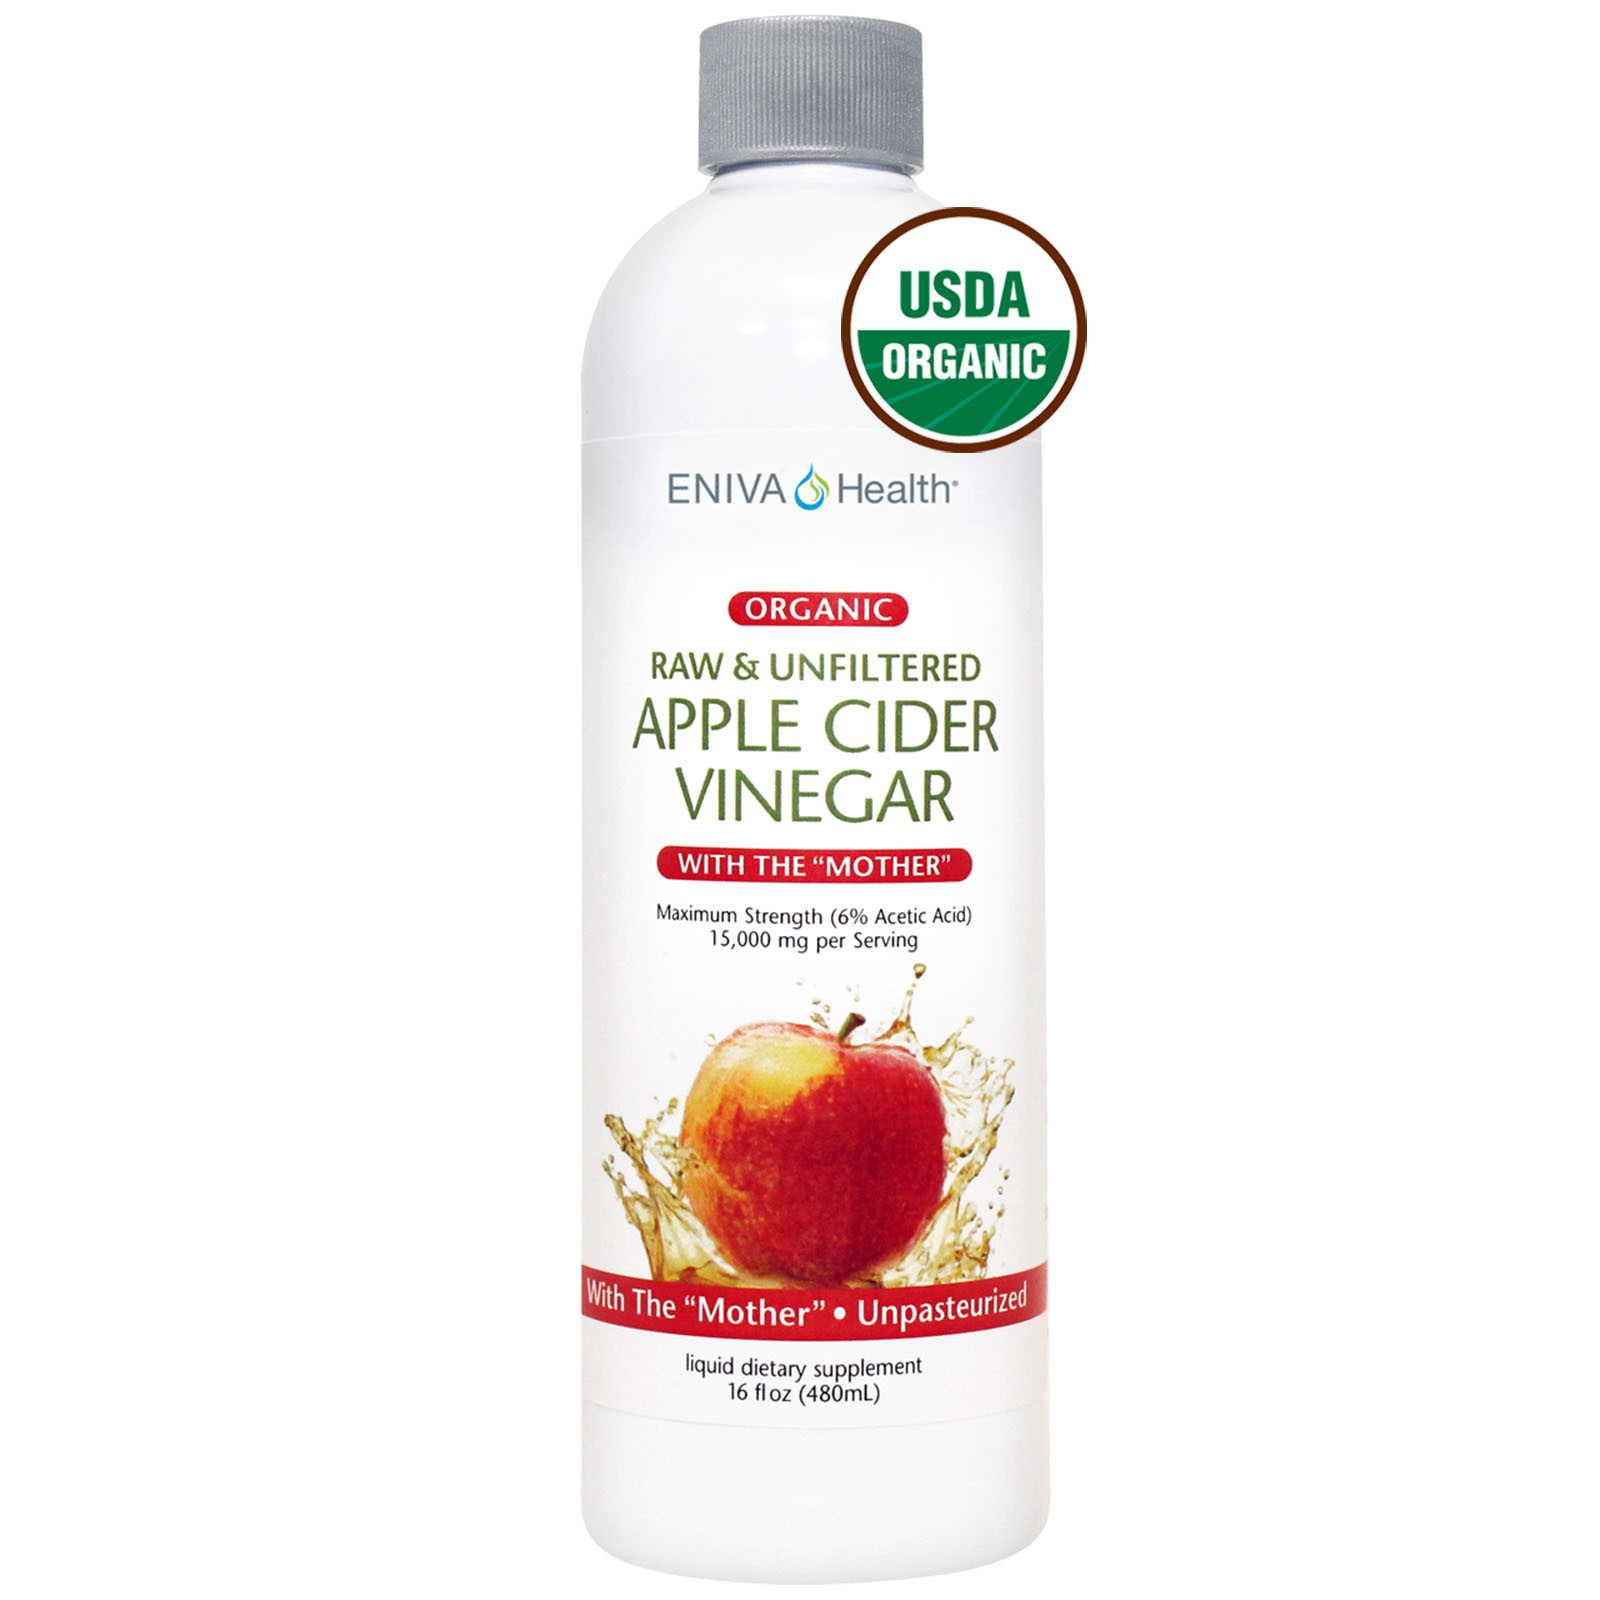 Save on Nature's Promise Organic Apples Red Delicious Order Online Delivery